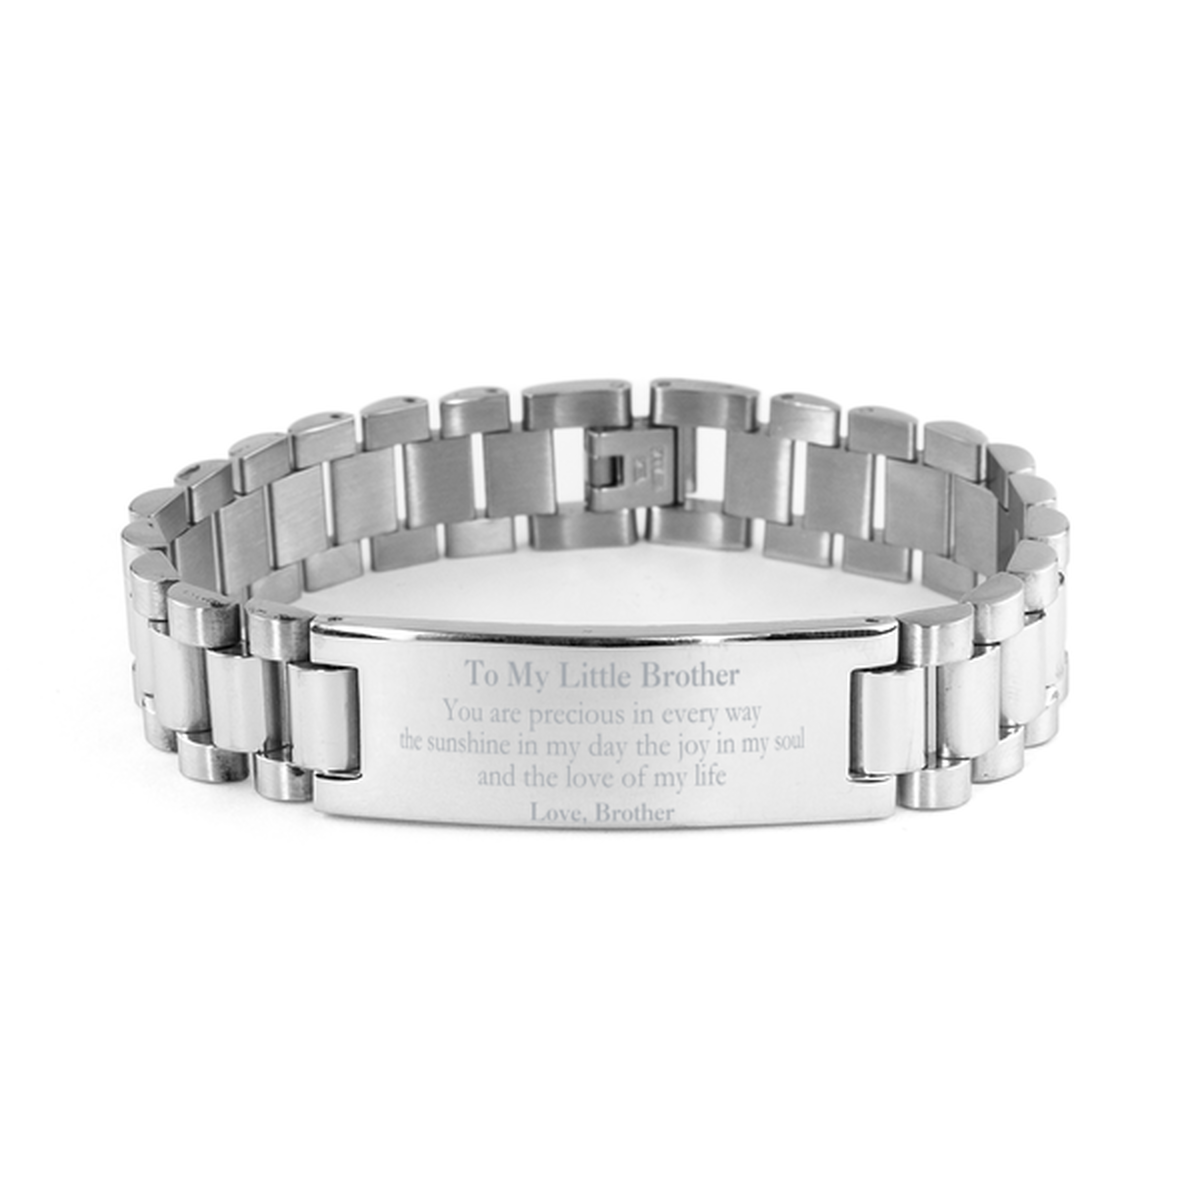 Graduation Gifts for Little Brother Ladder Stainless Steel Bracelet Present from Brother, Christmas Little Brother Birthday Gifts Little Brother You are precious in every way the sunshine in my day. Love, Brother